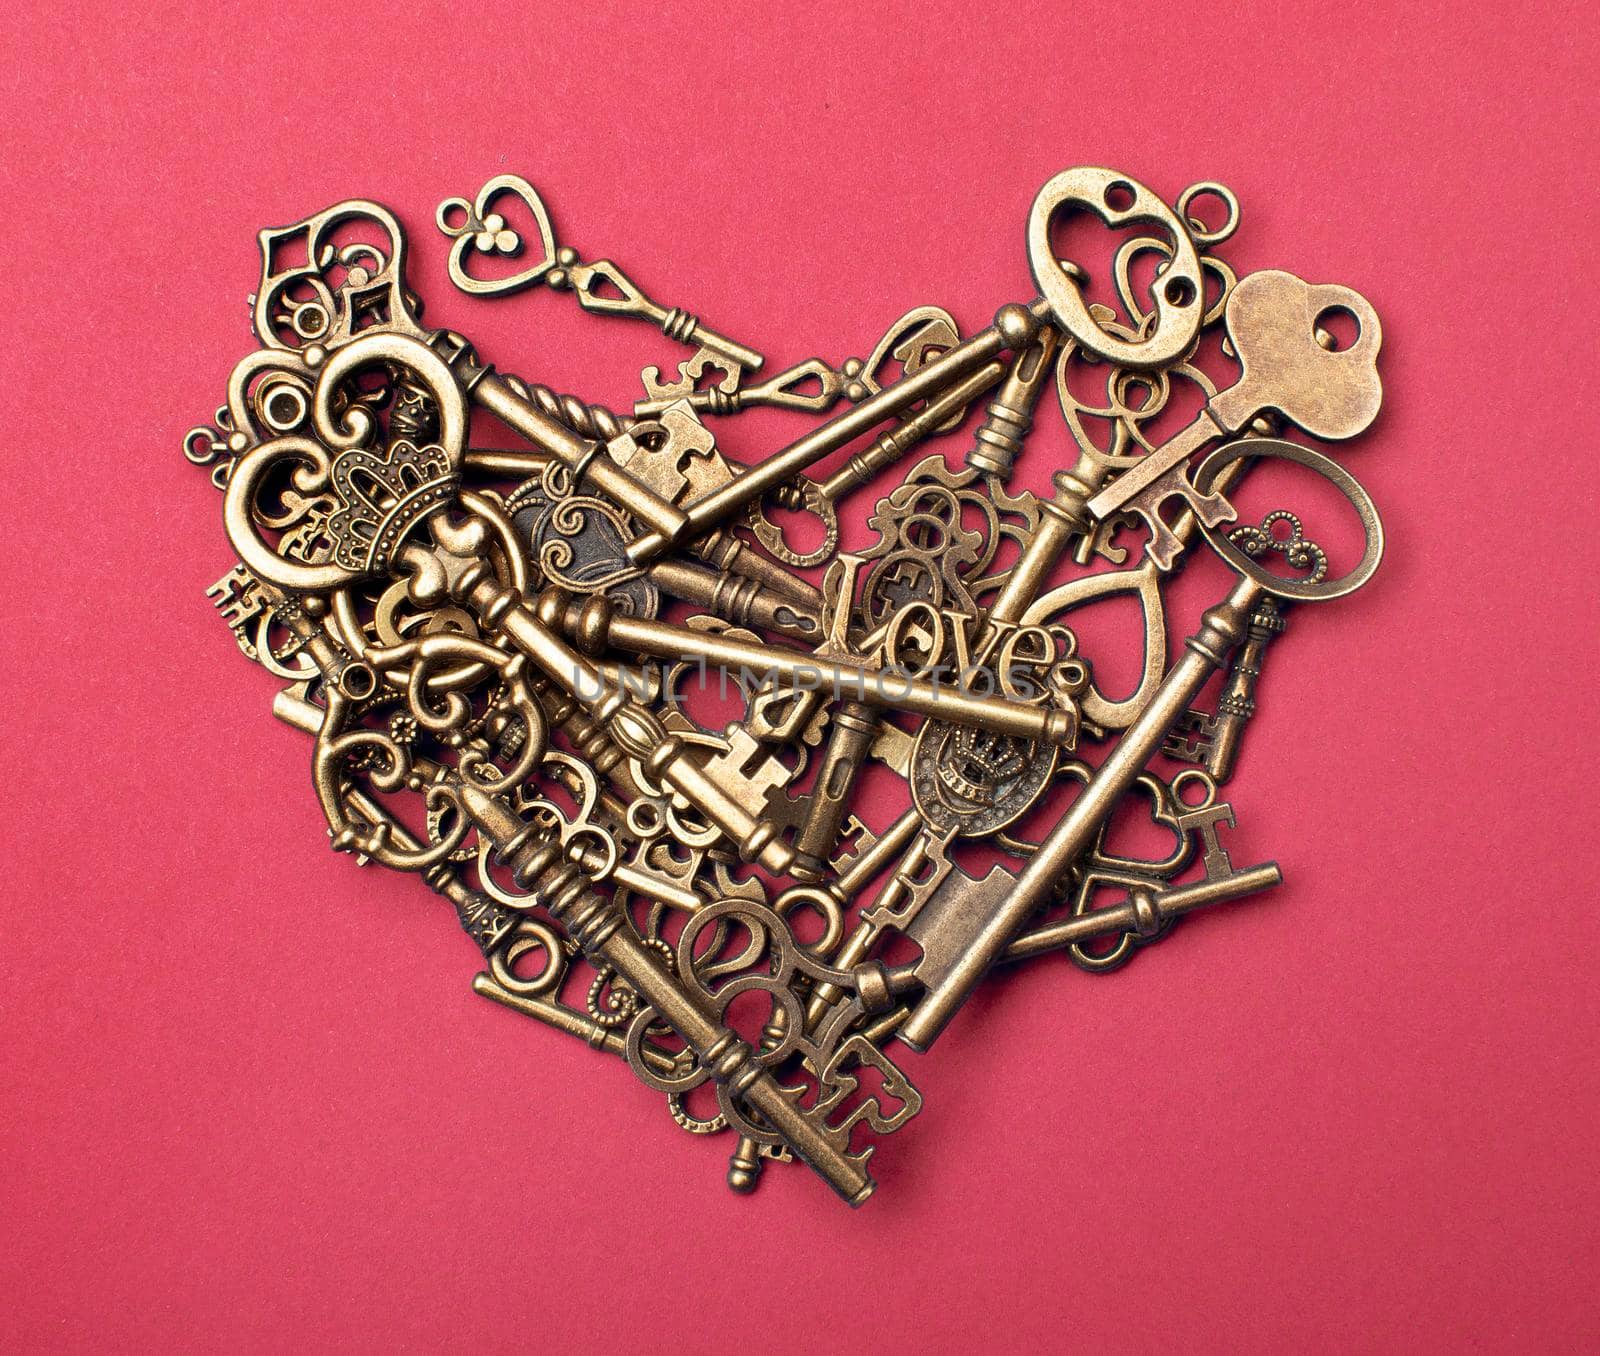 Old, vintage keys in the shape of a heart by SlayCer